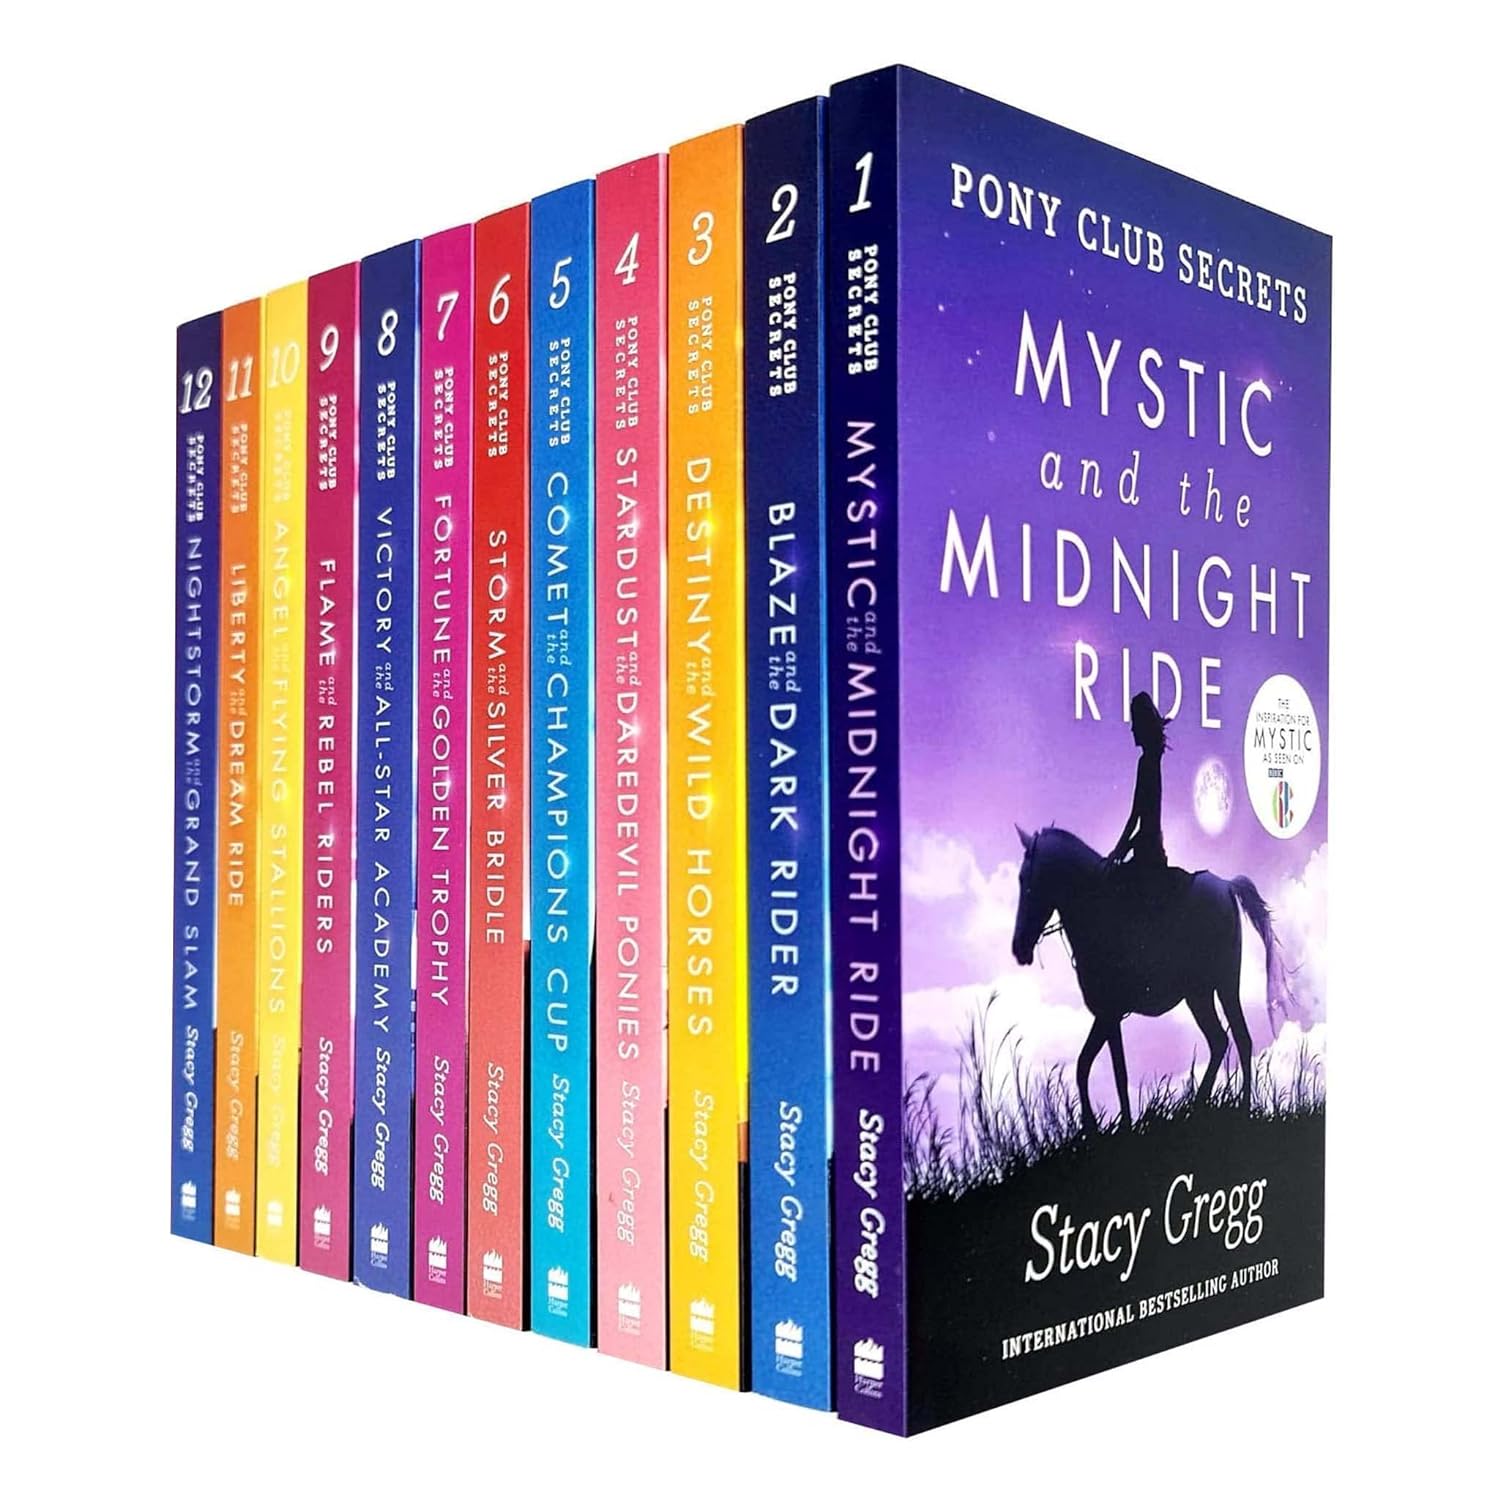 Pony Club Secrets Series by Stacy Gregg 12 Books Collection Set